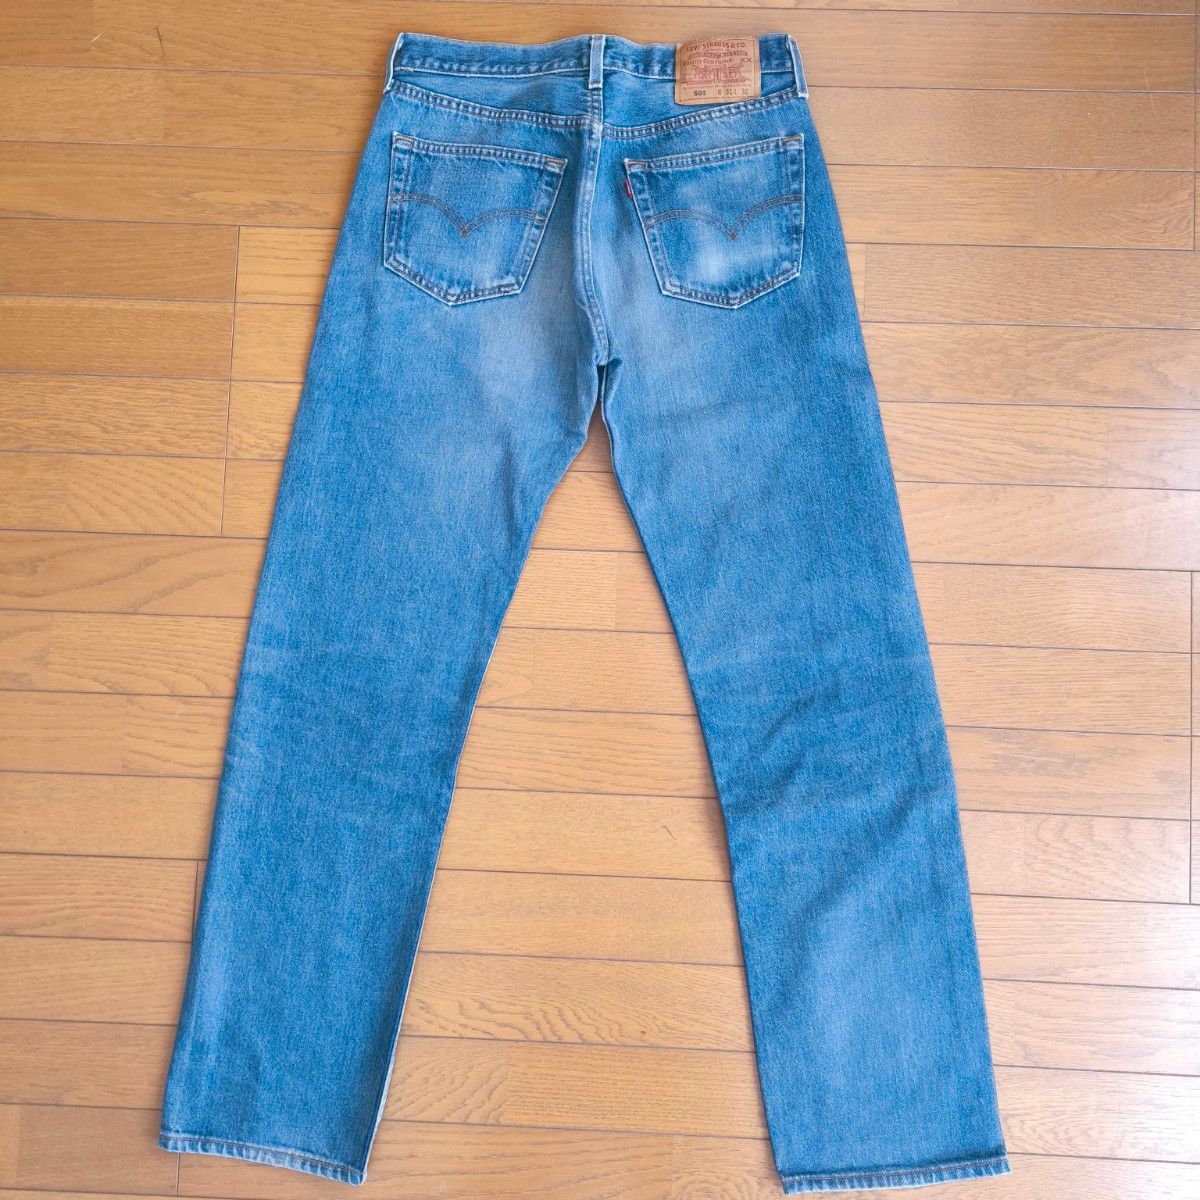 Levi's 501 W31 リーバイス made in usa